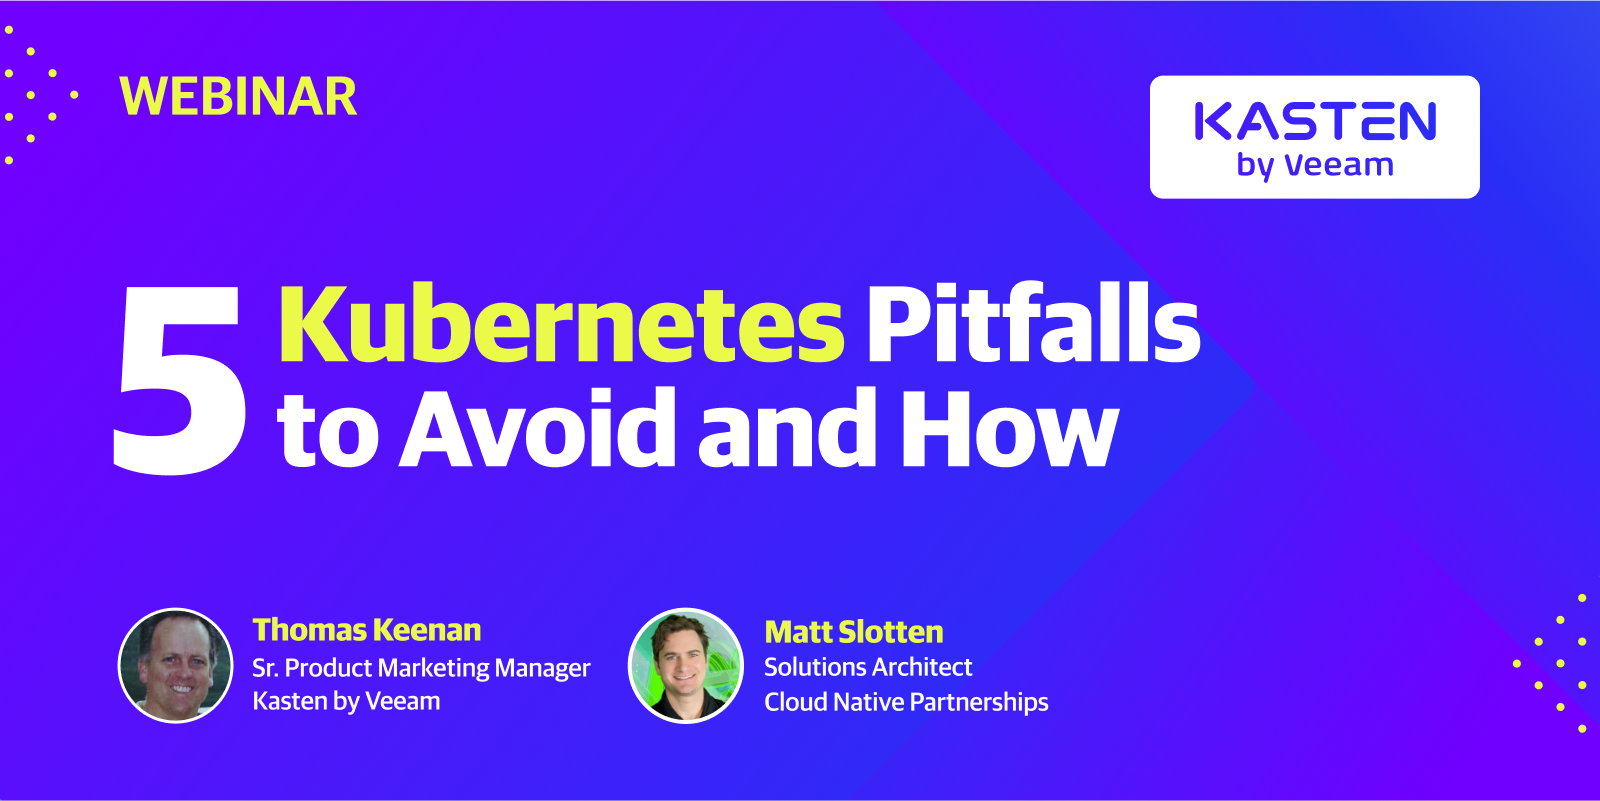 Featured img for website - WEBINAR_5 Kubernetes Pitfalls to Avoid 5